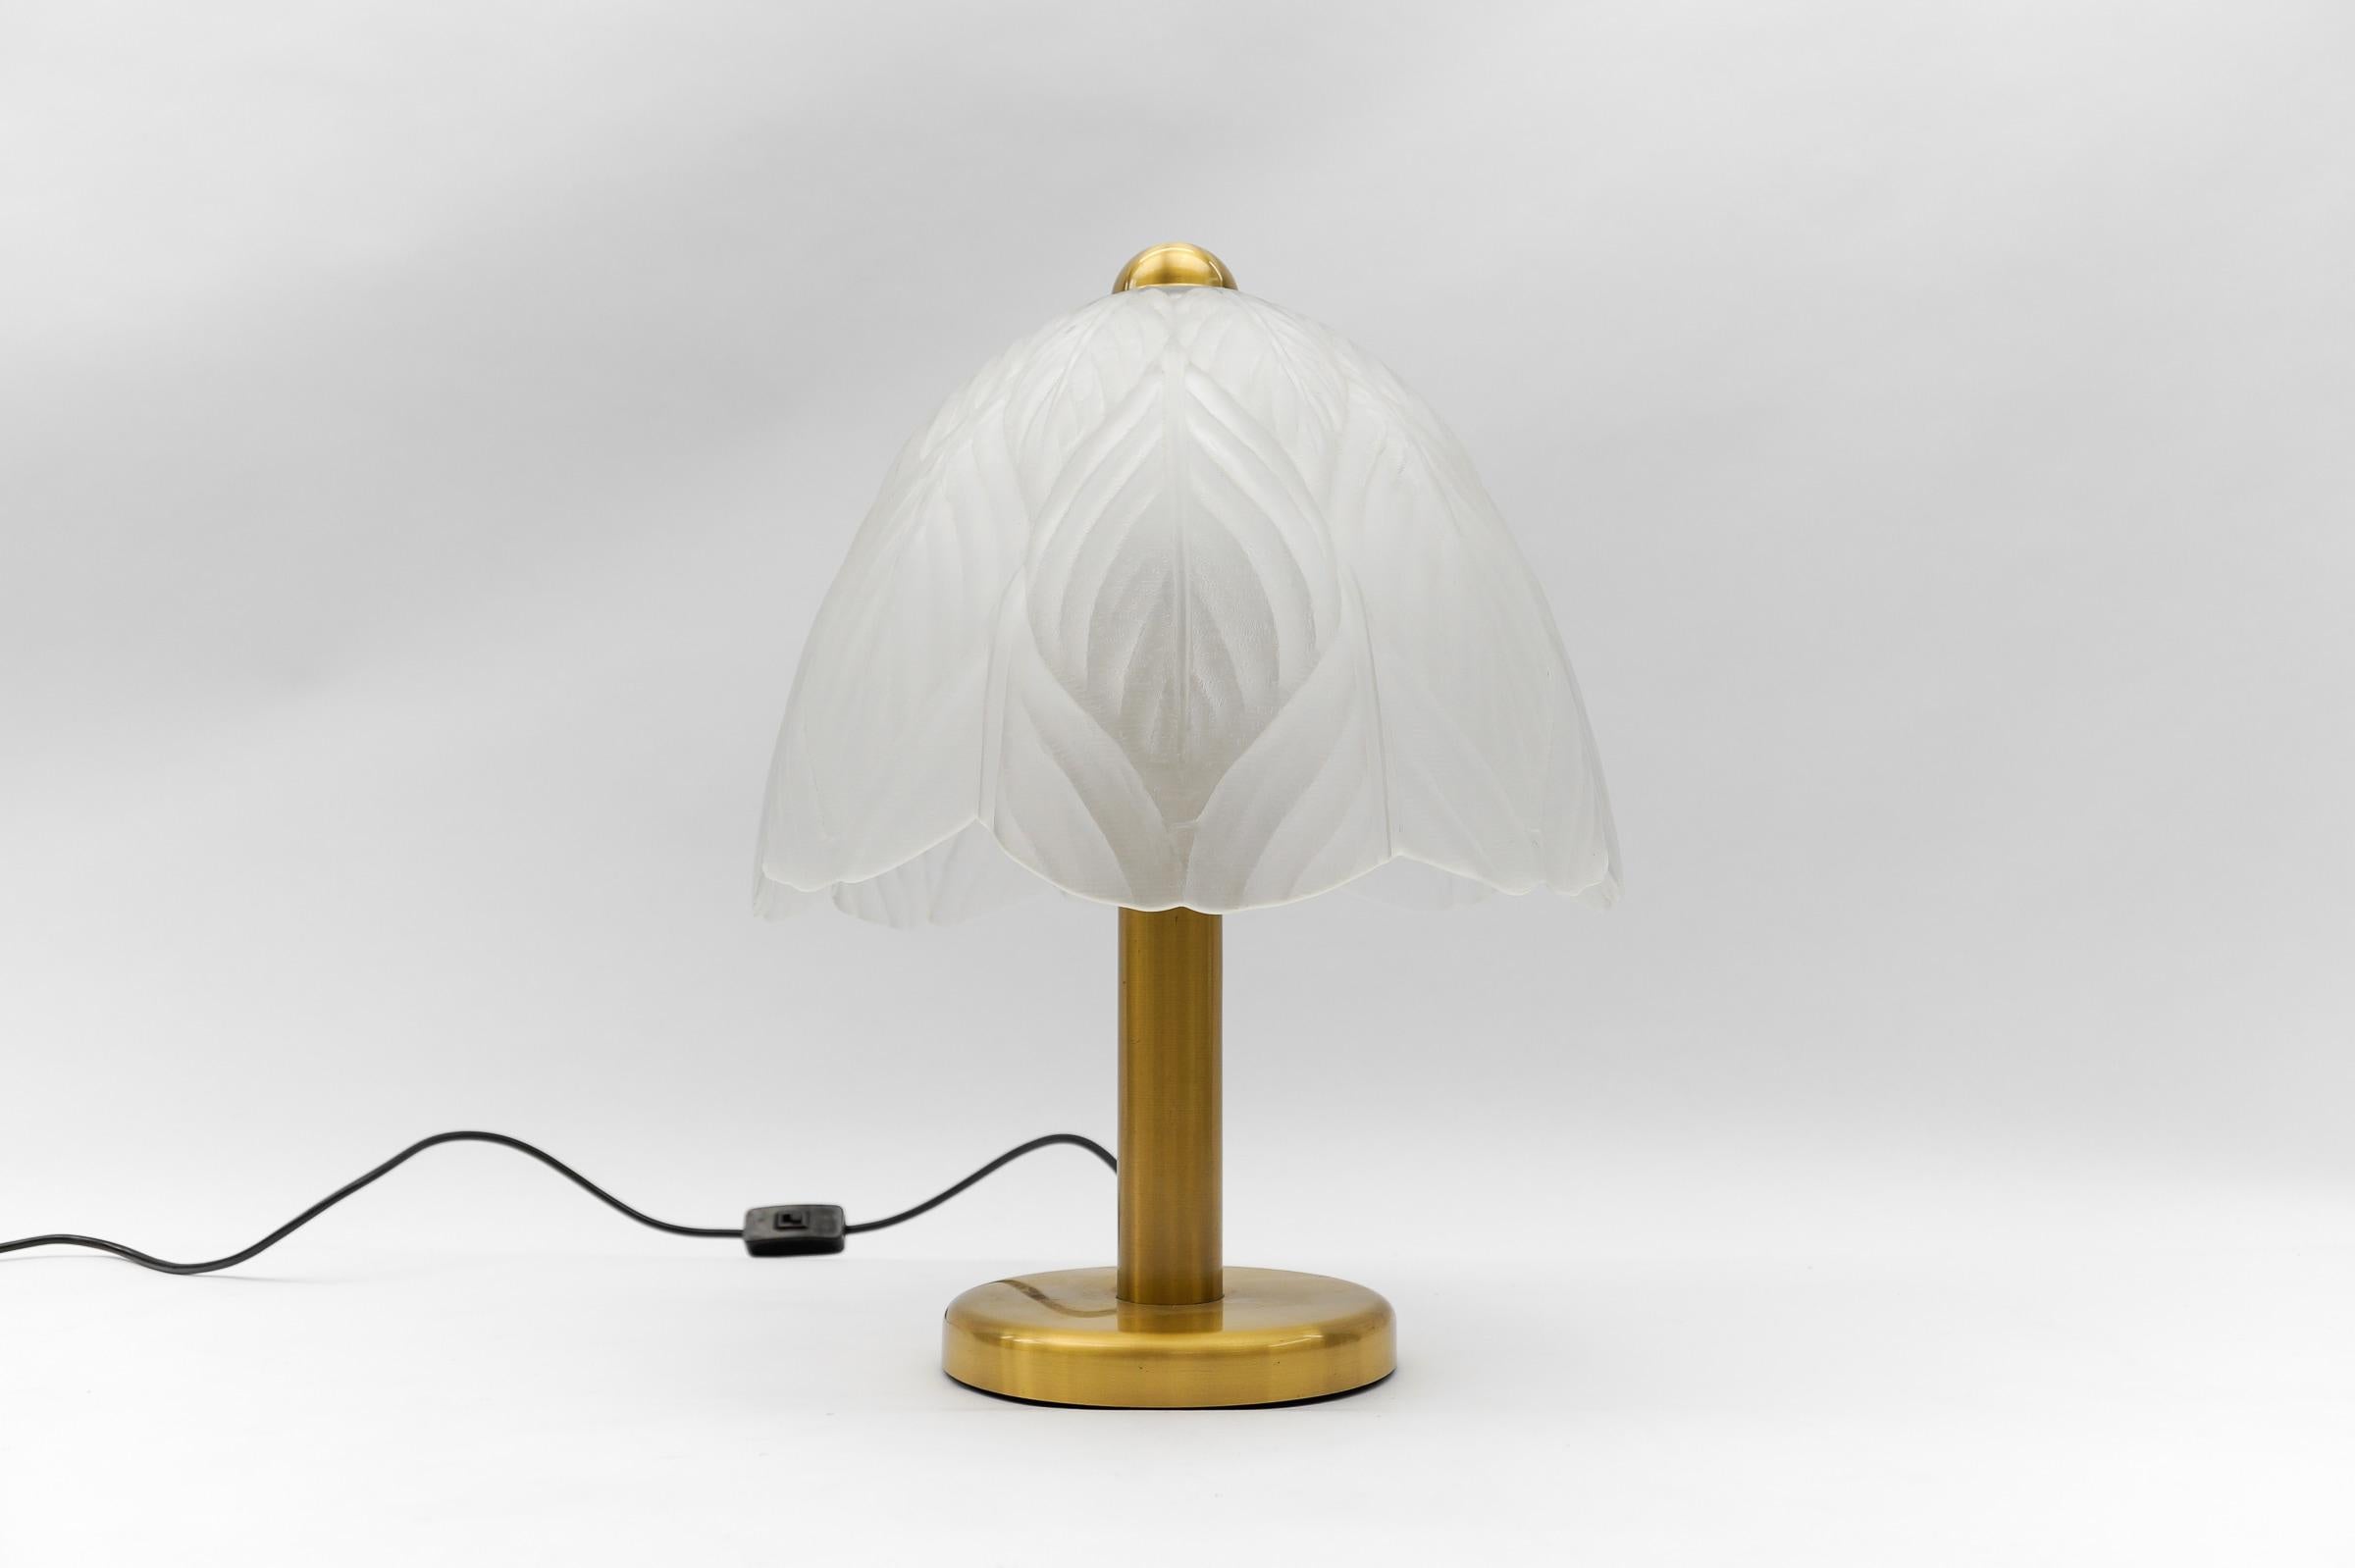 Lovely Satin Glass Table Lamp by Peill & Putzler, 1960s

Dimension
Height: 19.29 in (49 cm)
Depth: 12.99 in (33 cm)

The lamp needs 1 x E27 / E26 Edison screw fit bulb, is wired, and in working condition. It runs both on 110 / 230 volt.

Very